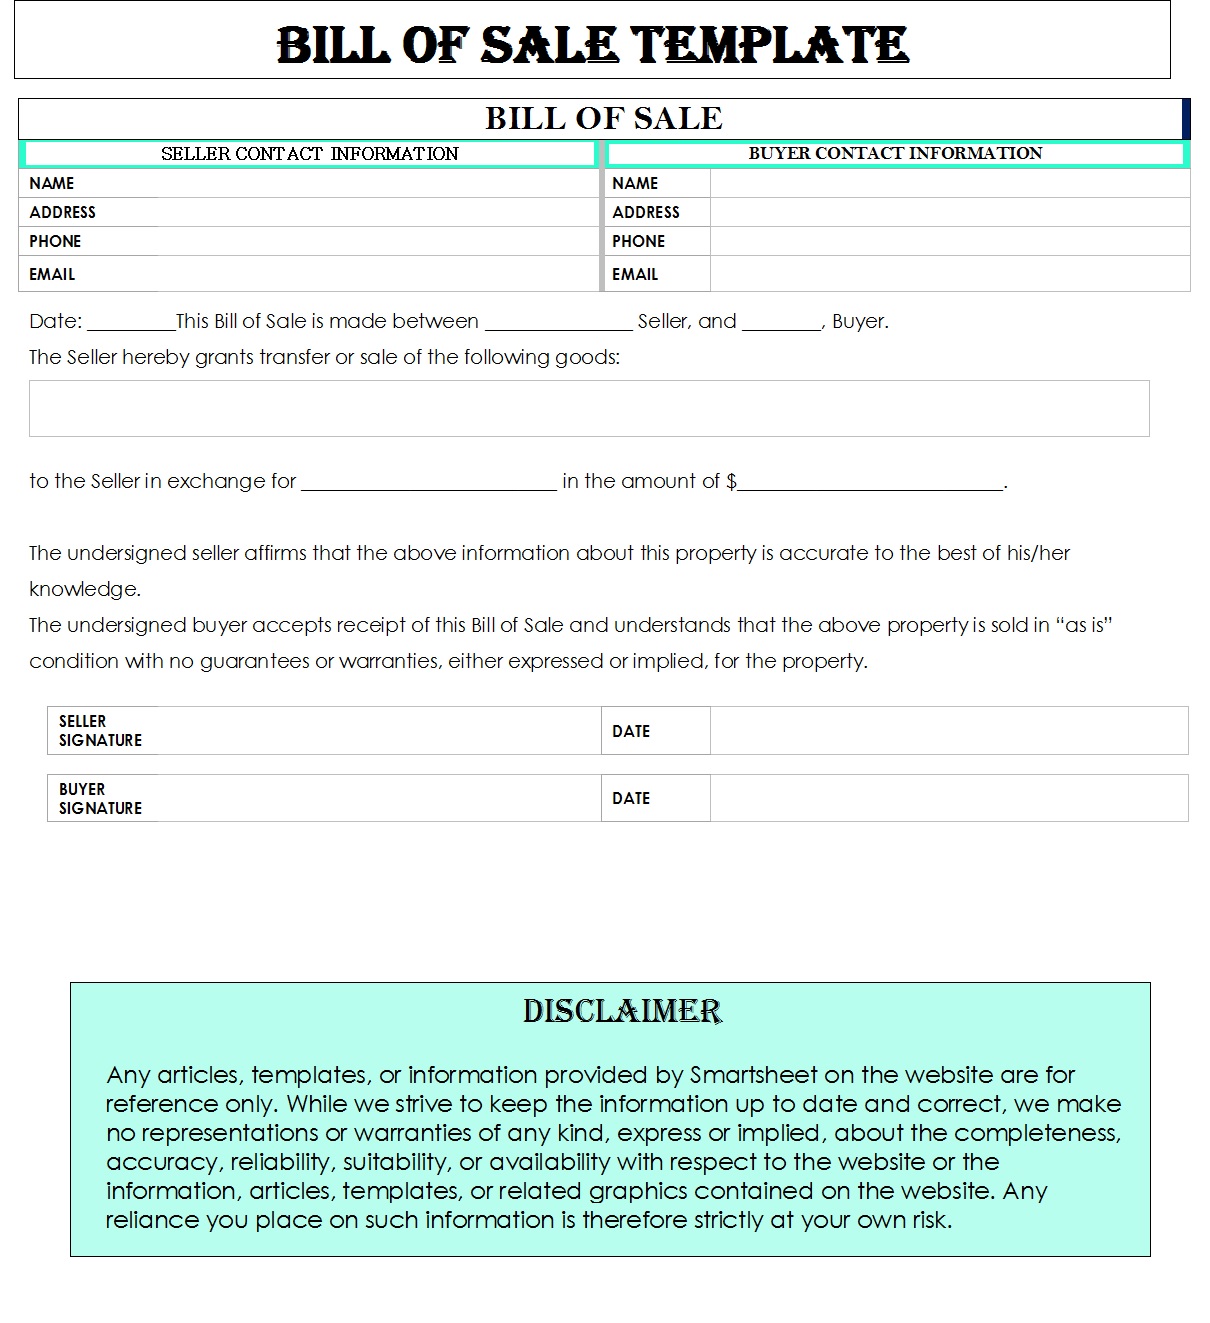 free-bill-of-sale-forms-24-word-pdf-eforms-basic-bill-of-sale